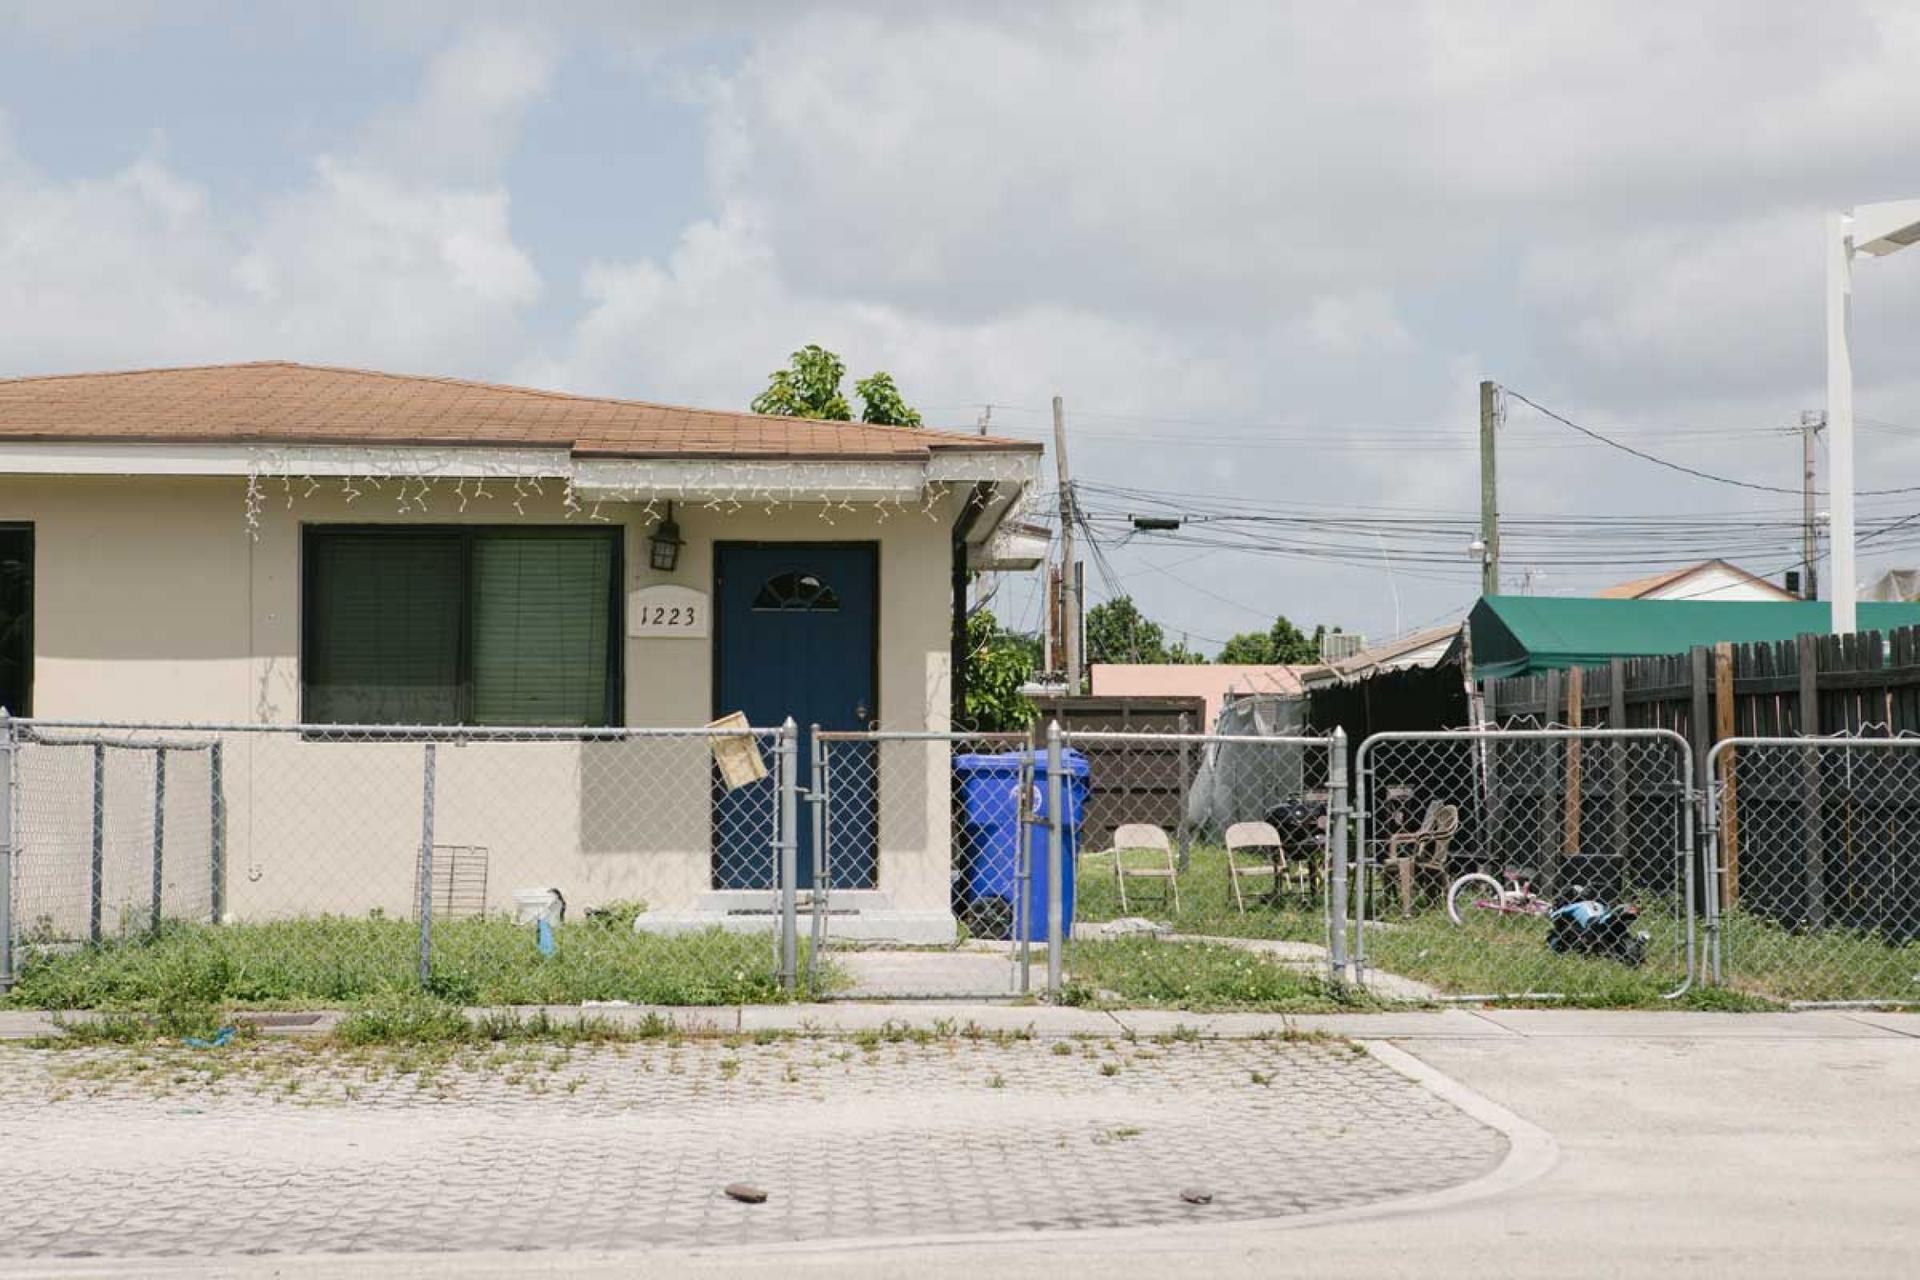 Nataly Alcantara and her family were robbed while living at this Miami home in November 2014. 